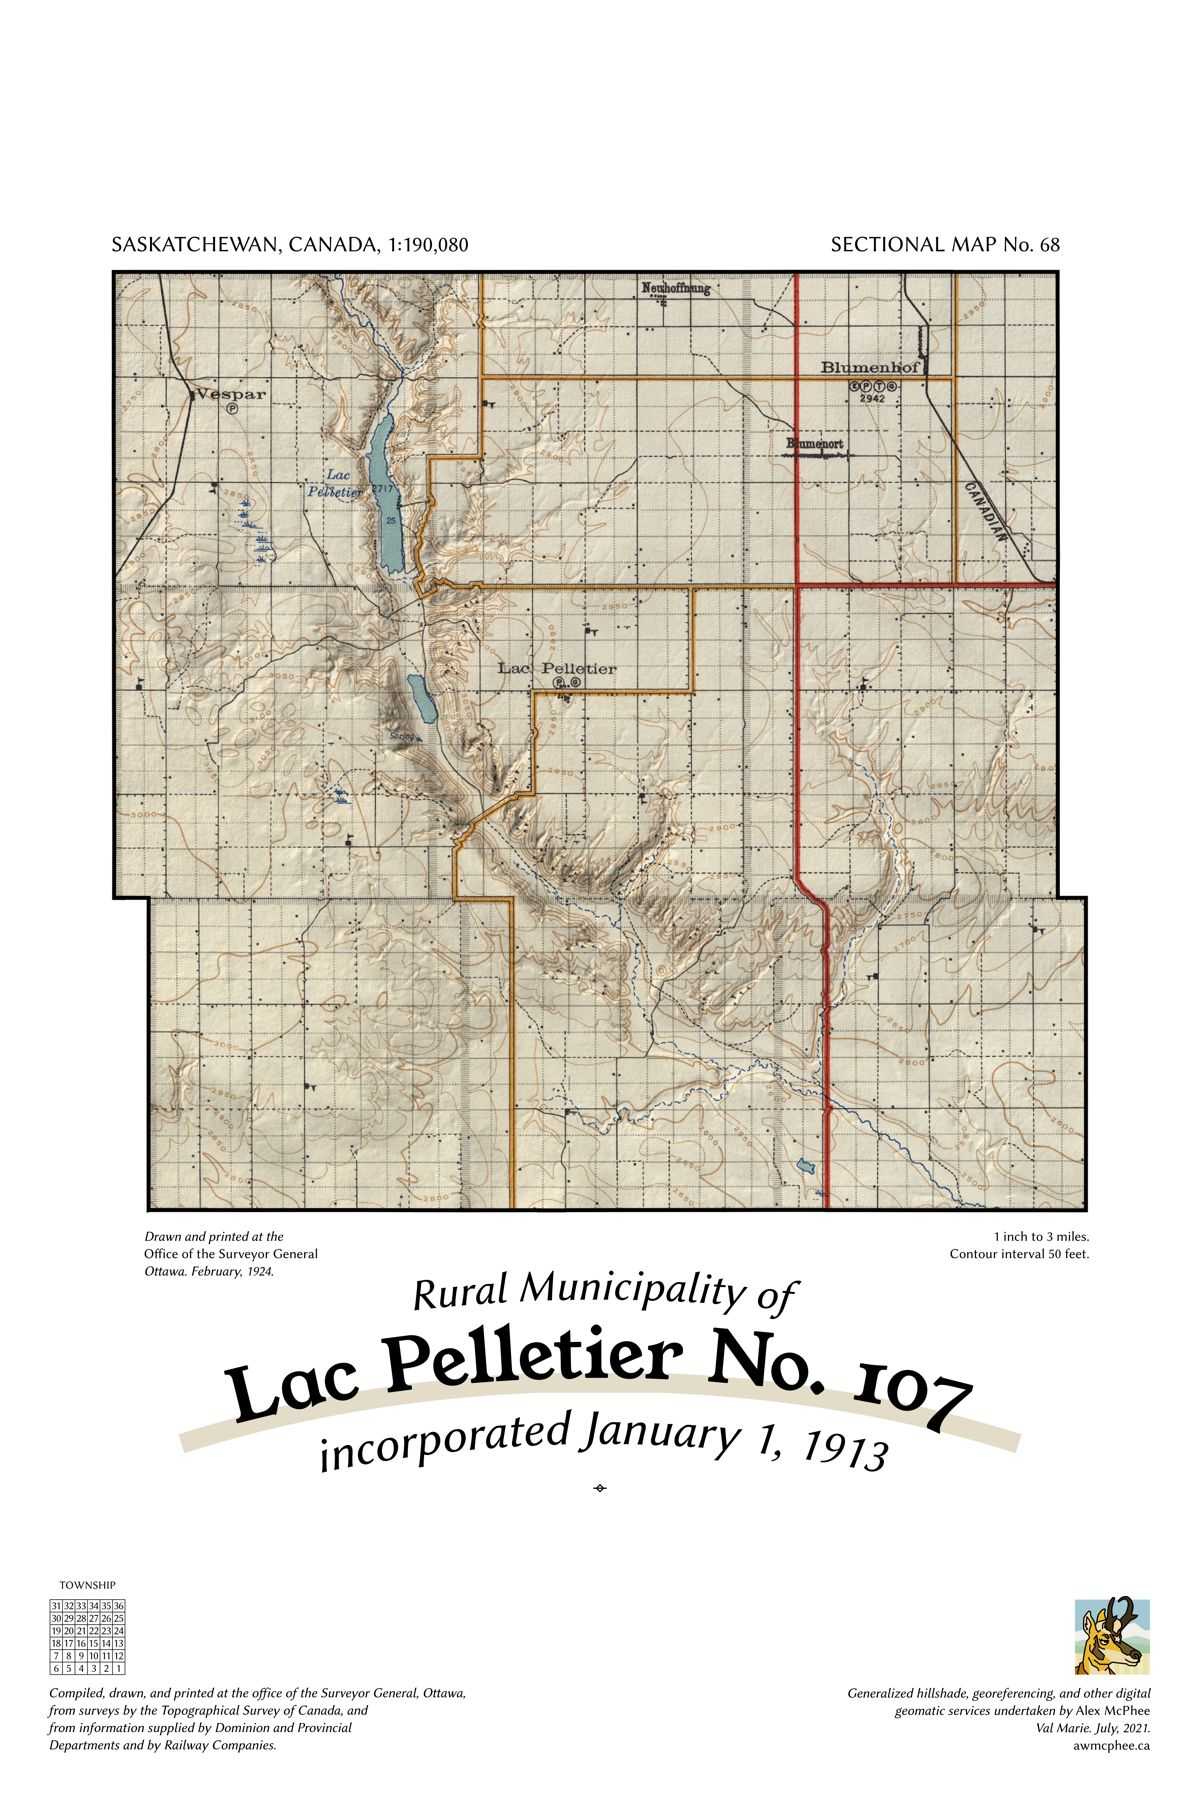 A map of the Rural Municipality of Lac Pelletier No. 107.